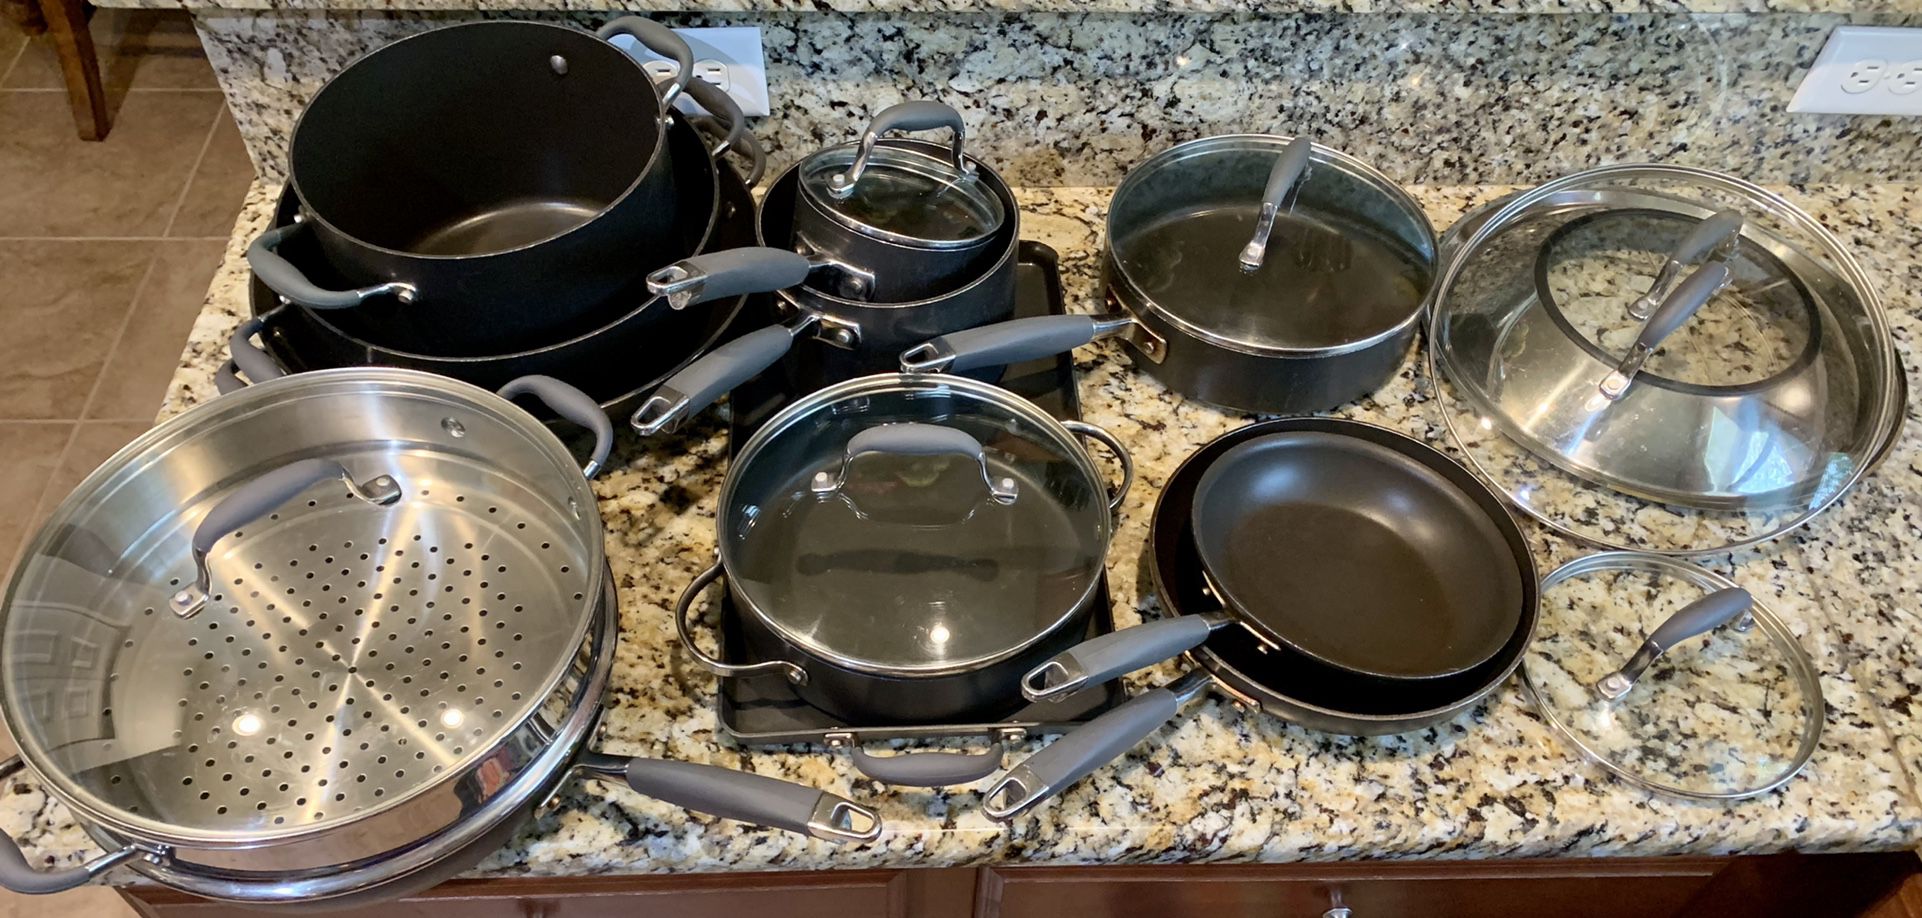 Anolon Advanced Home Hard-Anodized Nonstick Cookware Set in Moonstone Pots And Pans   Excellent condition!!! 